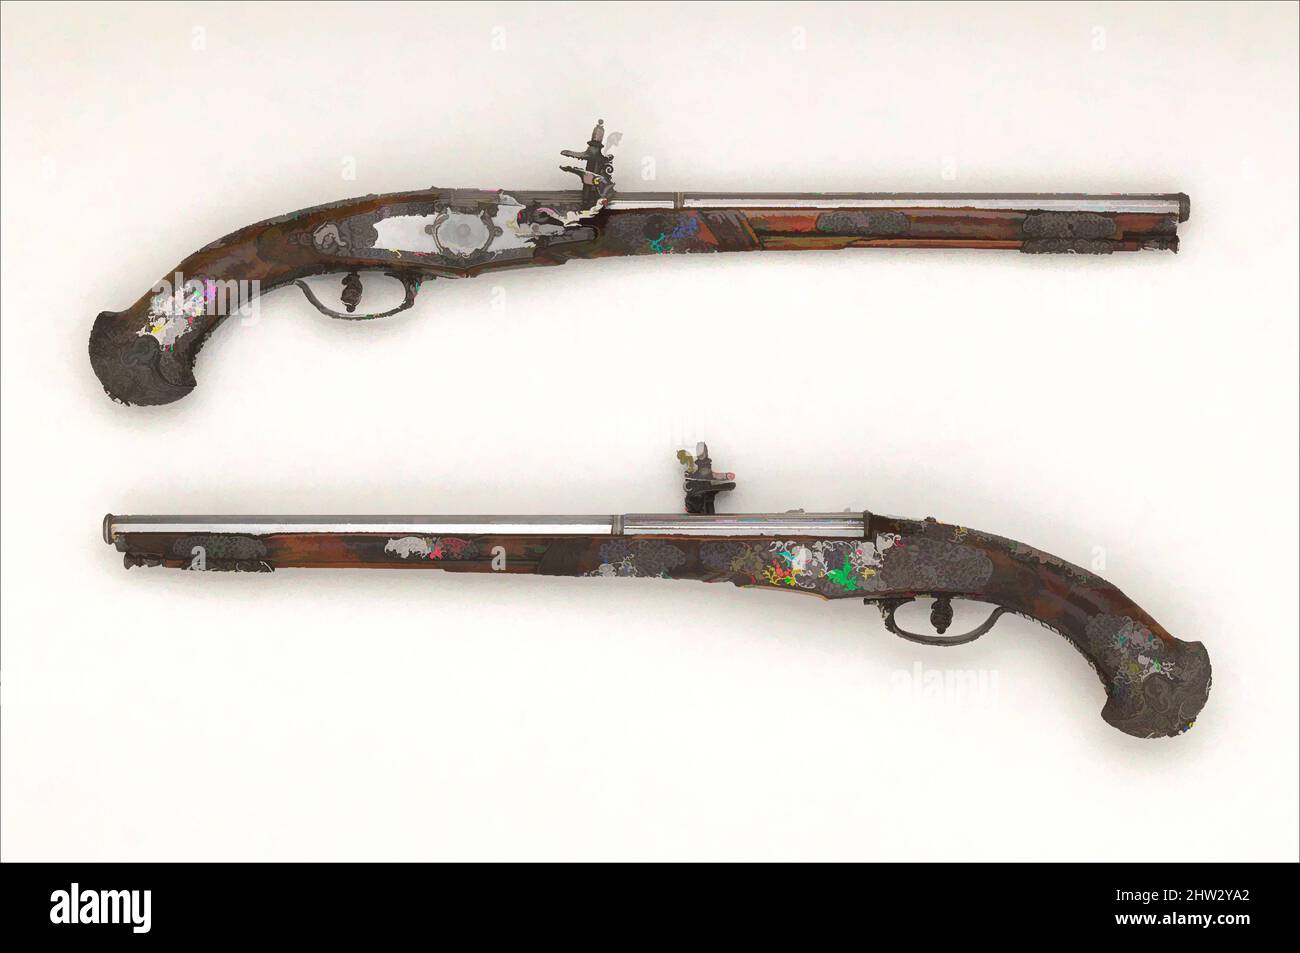 Art inspired by Pair of Wheellock Pistols, mid-17th century, Brescia, Italian, Brescia, Steel, wood (walnut), L. of : 22 11/16 in. (57.7 cm); Cal. of : in. (12.6 mm); Wt. of : 2 lb. 3 oz. (997 g); L. of : 22 13/16 in. (57.9 cm); Cal. of : in. (12.3 mm); Wt. of : 2 lb. 3 oz. (1003 g, Classic works modernized by Artotop with a splash of modernity. Shapes, color and value, eye-catching visual impact on art. Emotions through freedom of artworks in a contemporary way. A timeless message pursuing a wildly creative new direction. Artists turning to the digital medium and creating the Artotop NFT Stock Photo